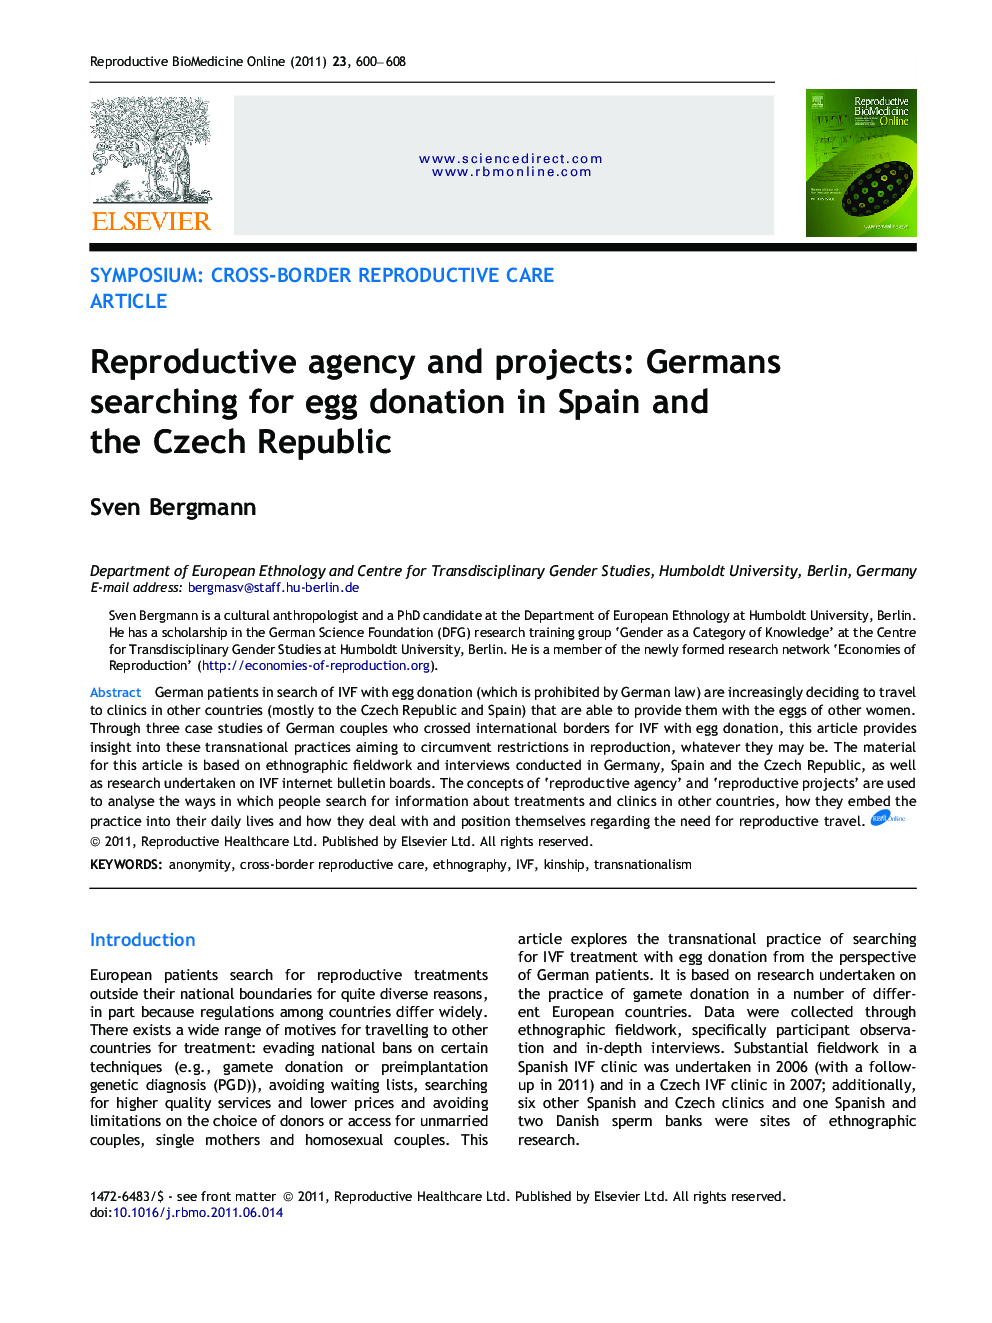 Reproductive agency and projects: Germans searching for egg donation in Spain and the Czech Republic 